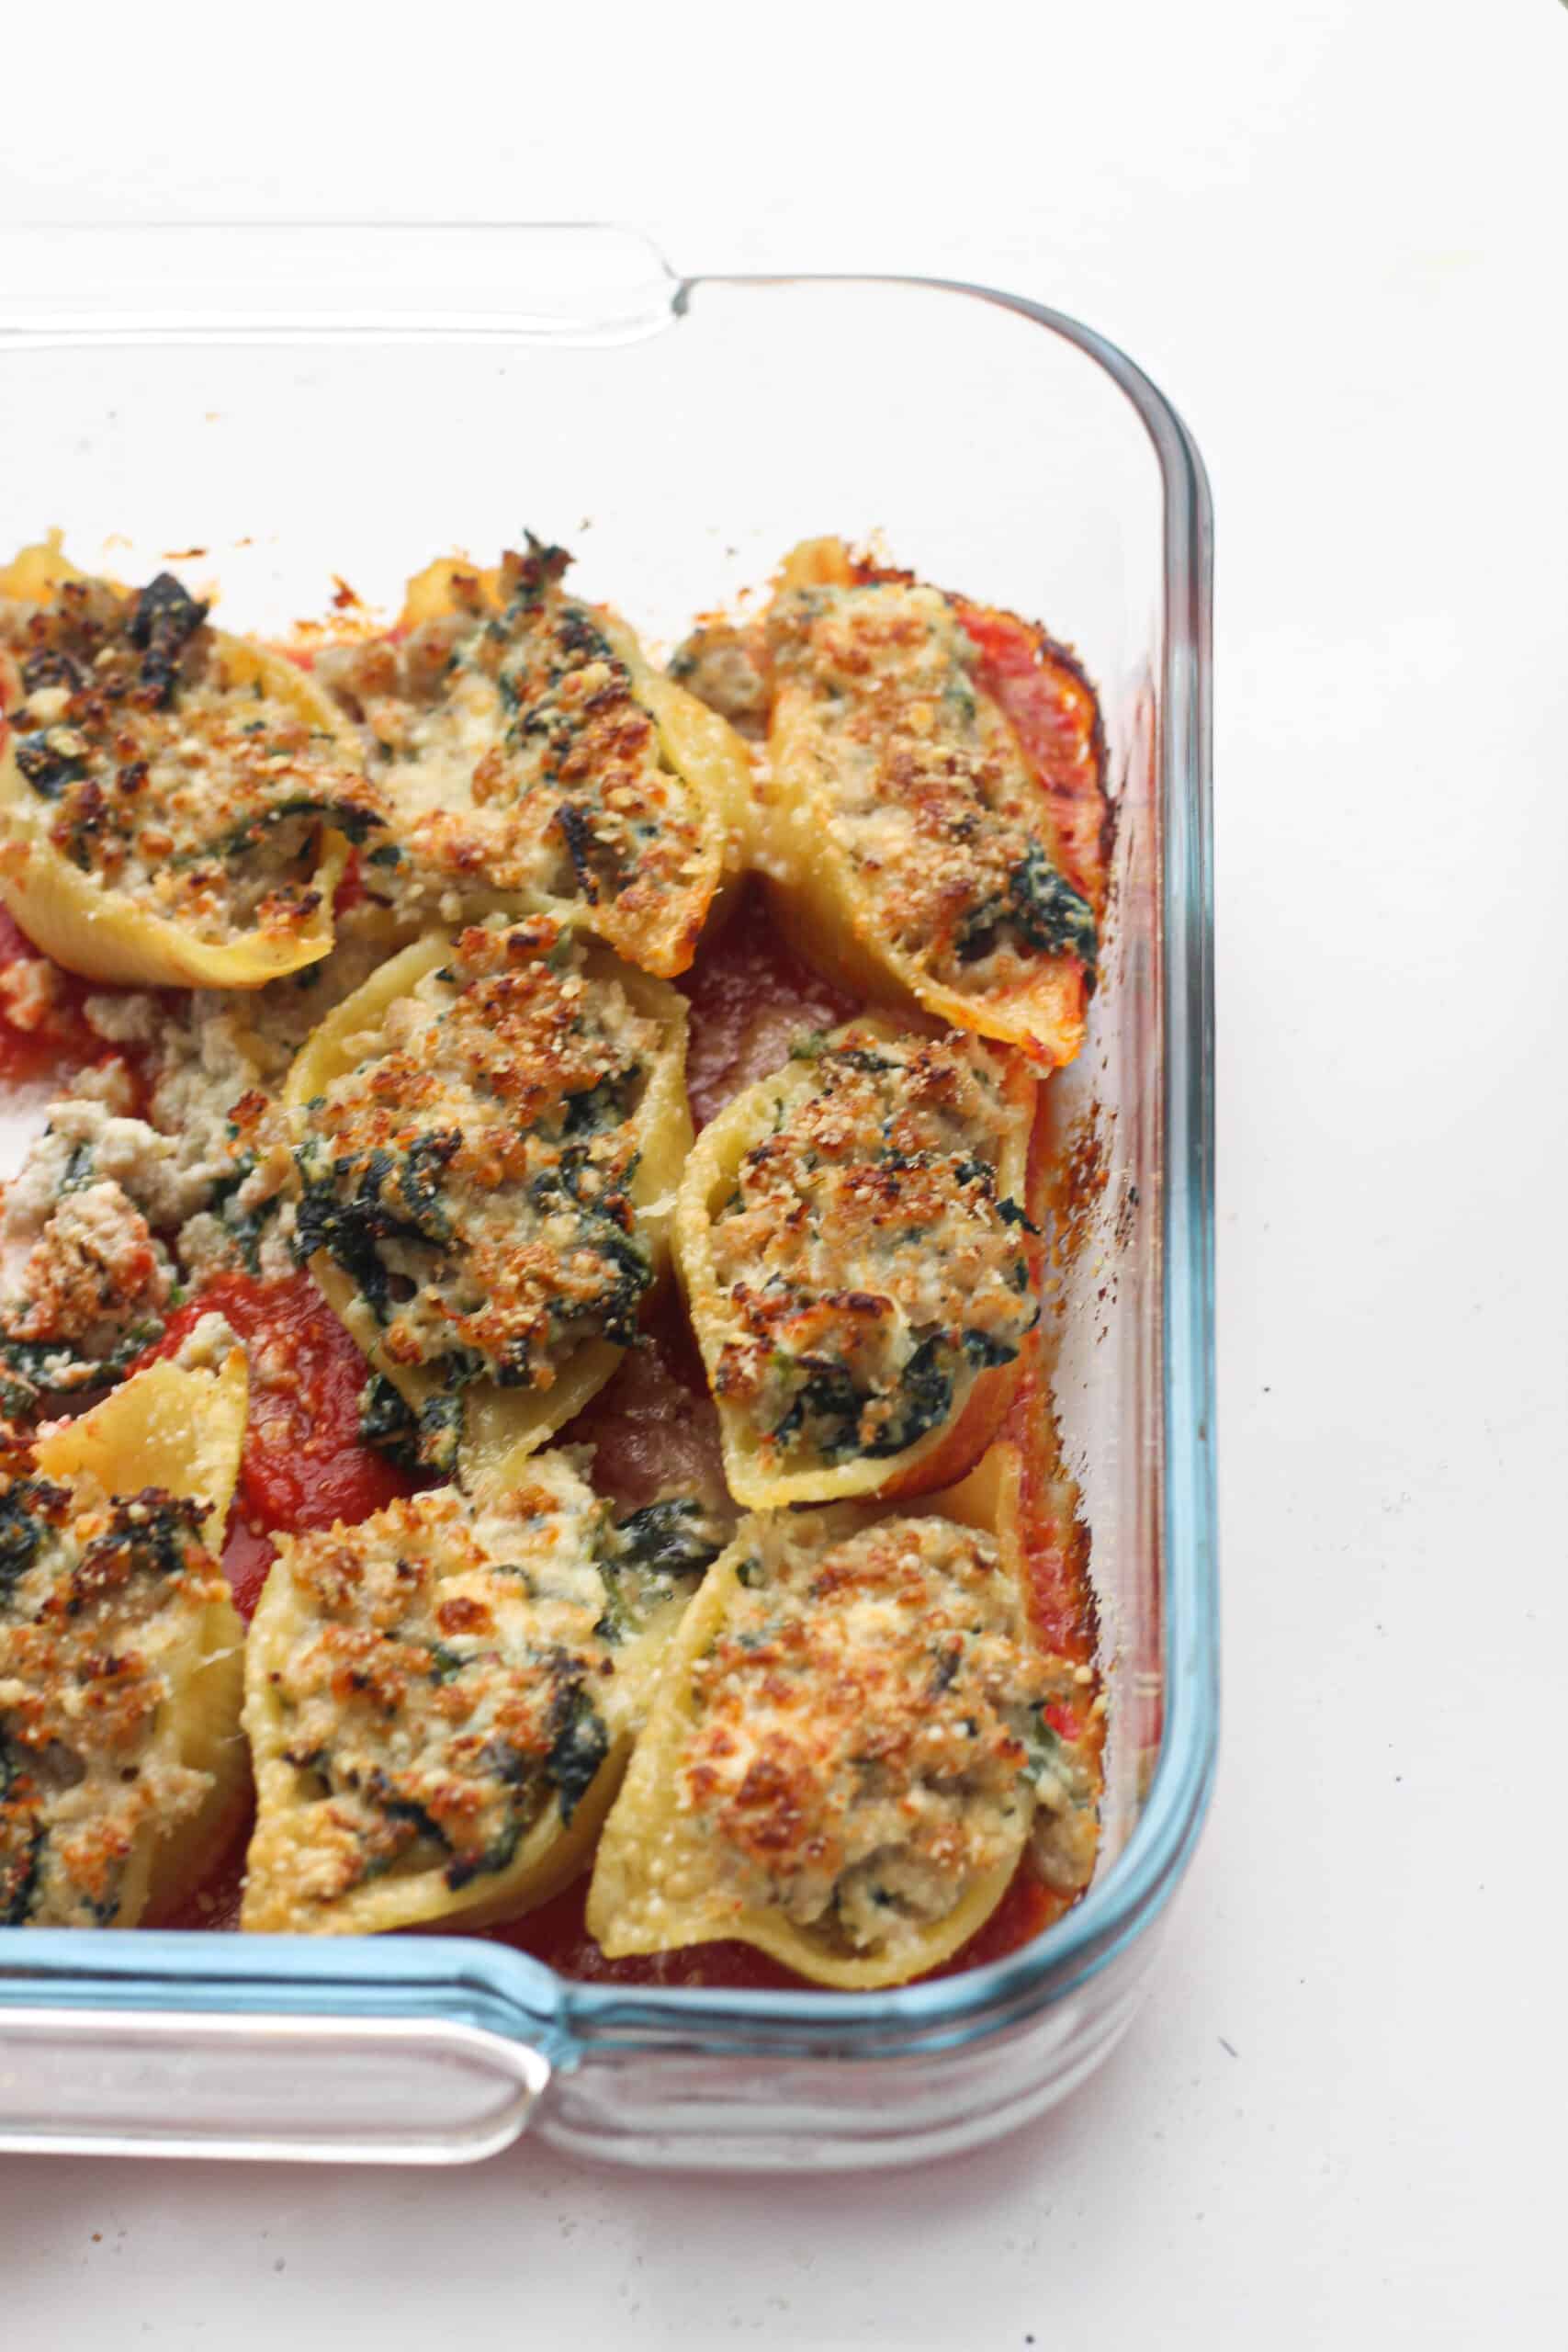 Salmon and spinach stuffed pasta shells	
